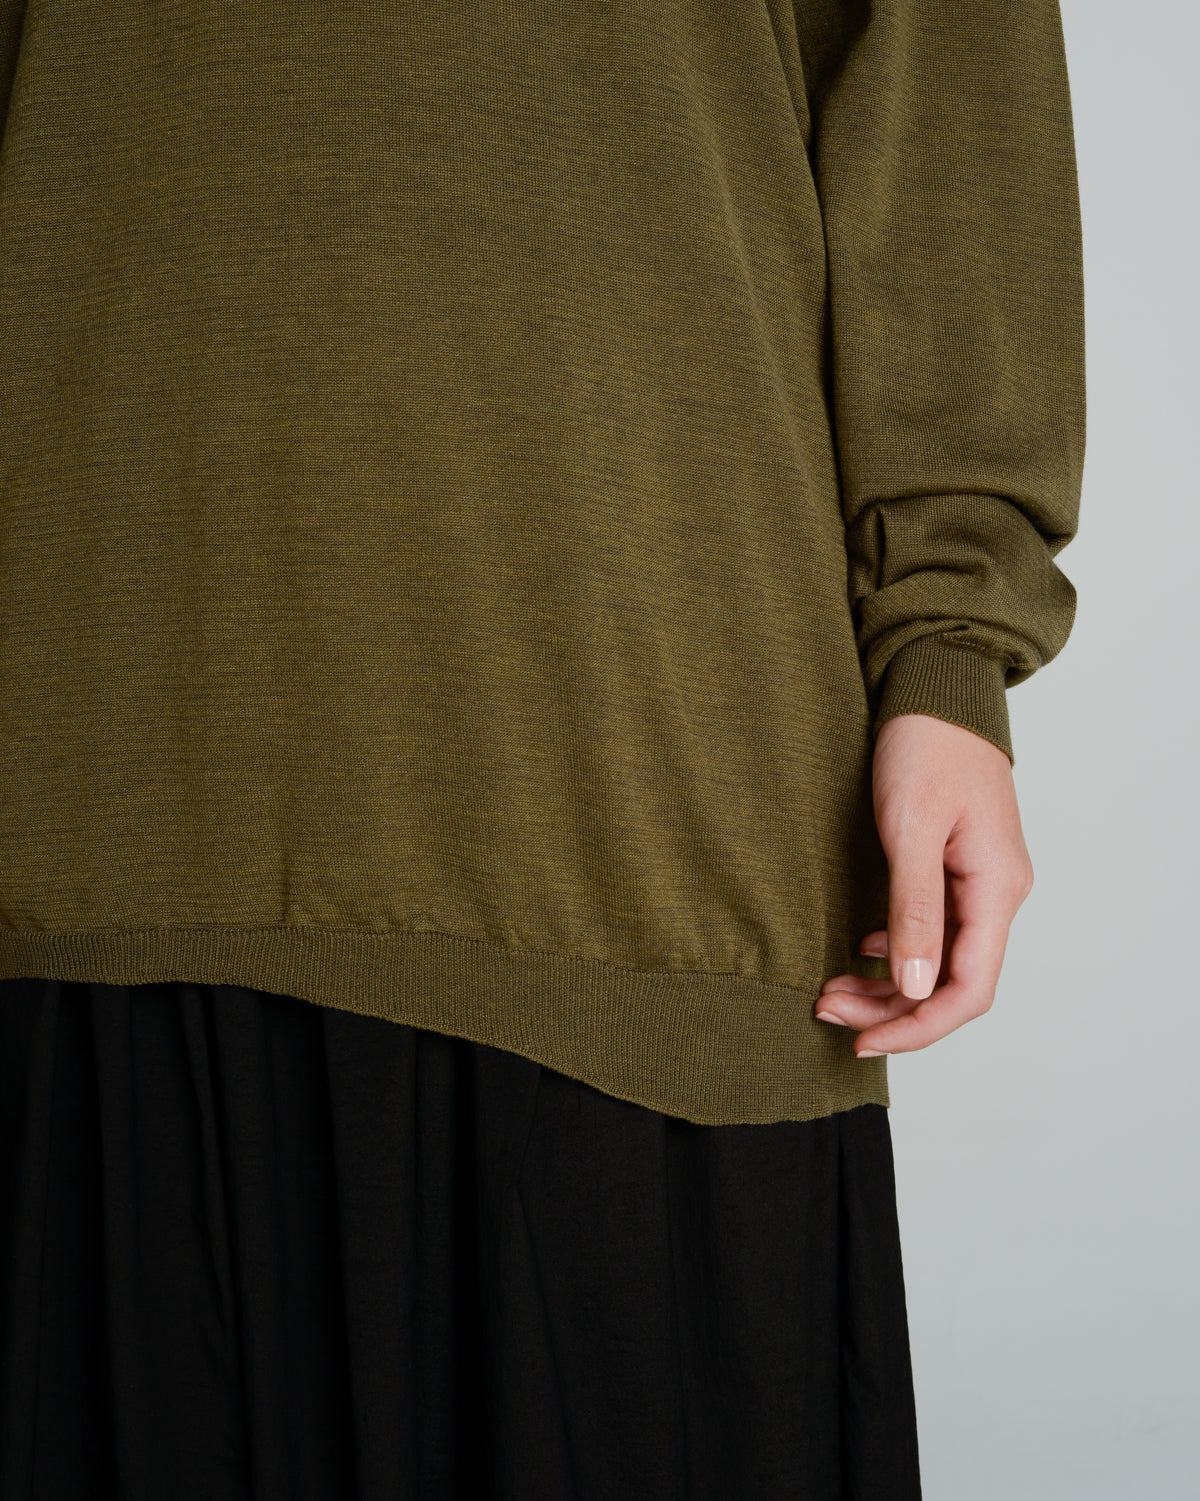 Green and Black Longsleeve Knit Top